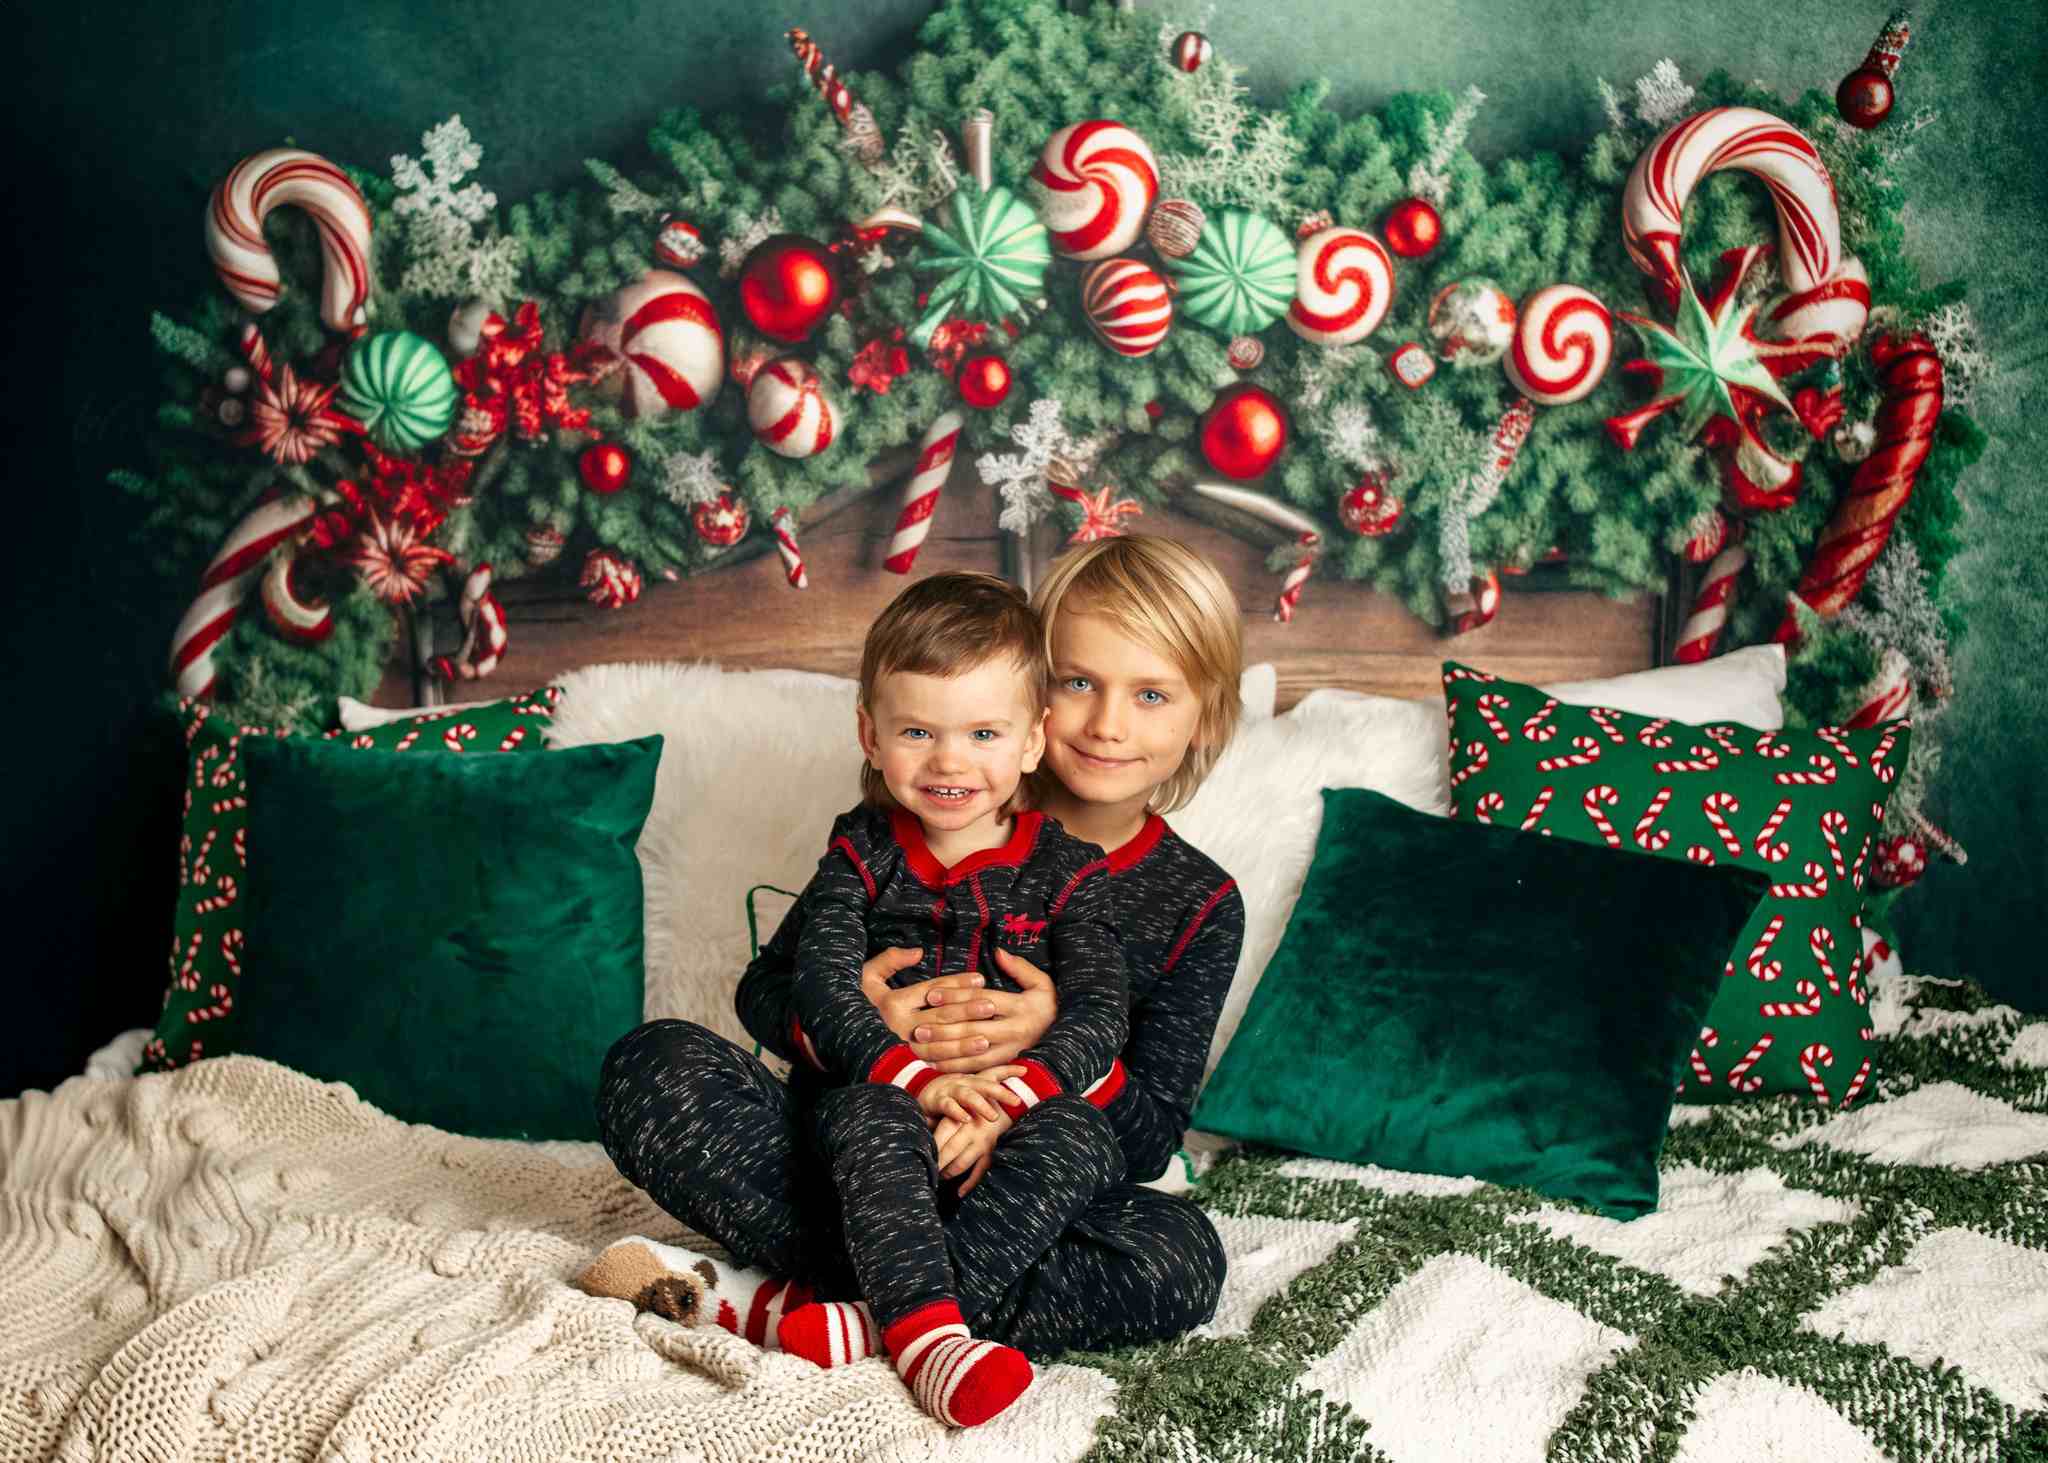 Kate Green Christmas Headboard Backdrop Candy Cane Designed by Mandy Ringe Photography